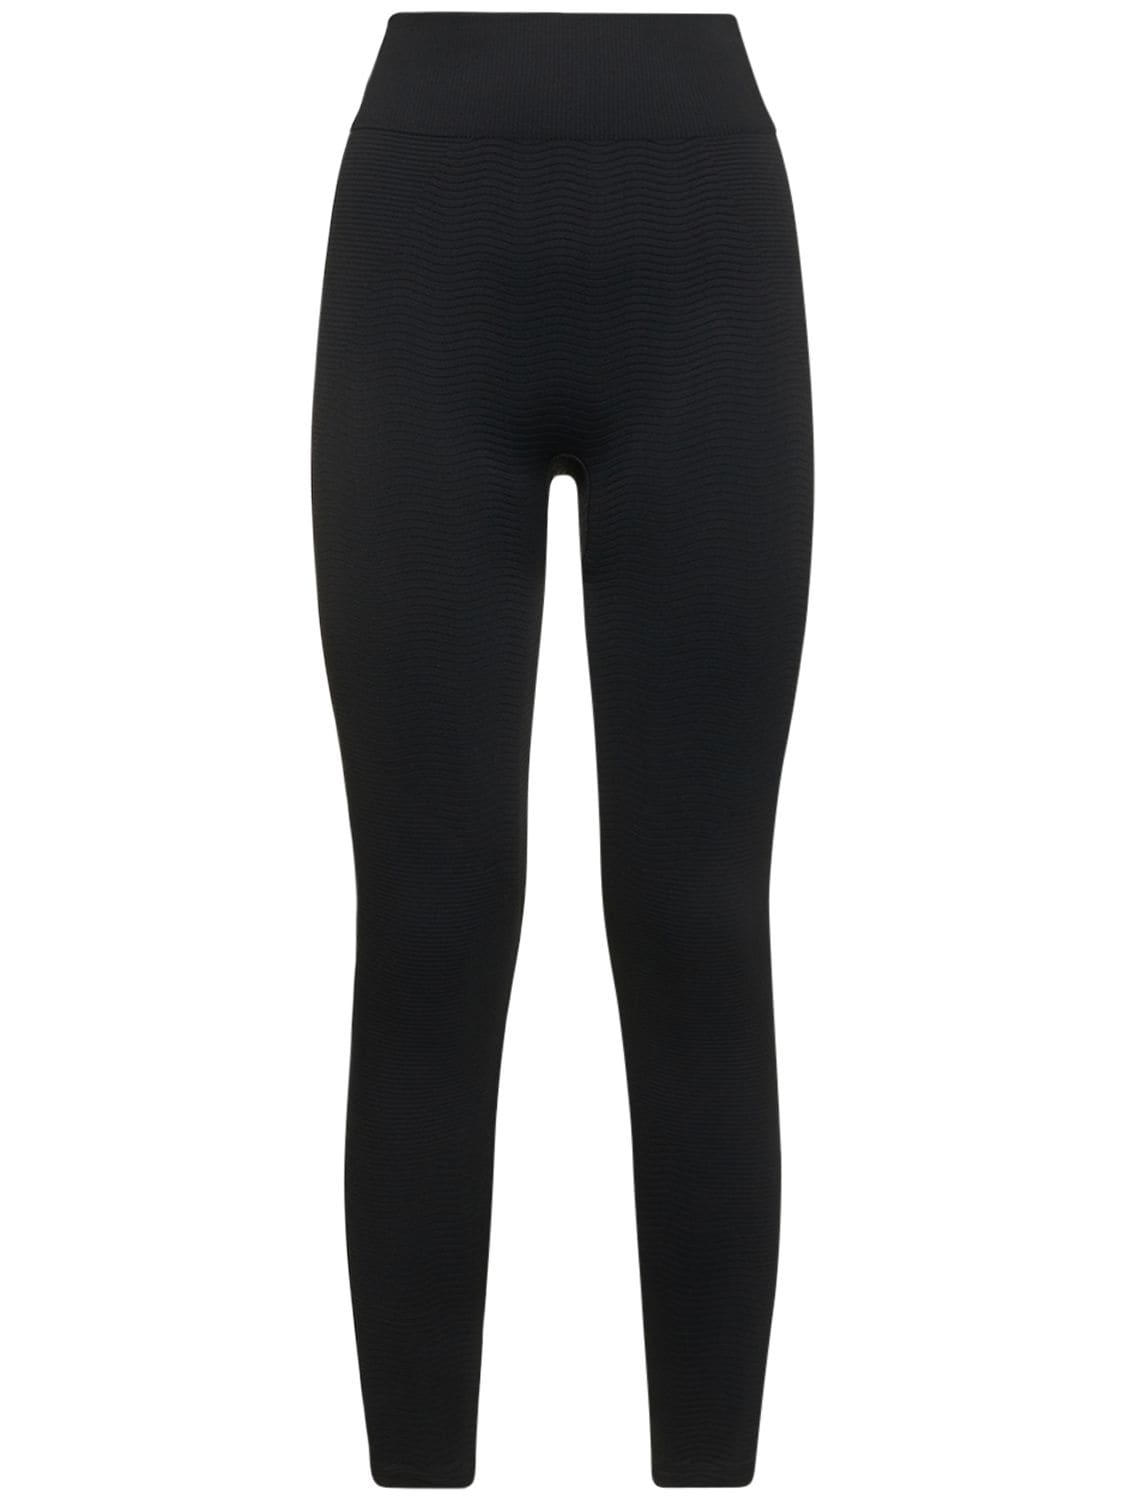 Image of The W Wellness Smoothing Leggings